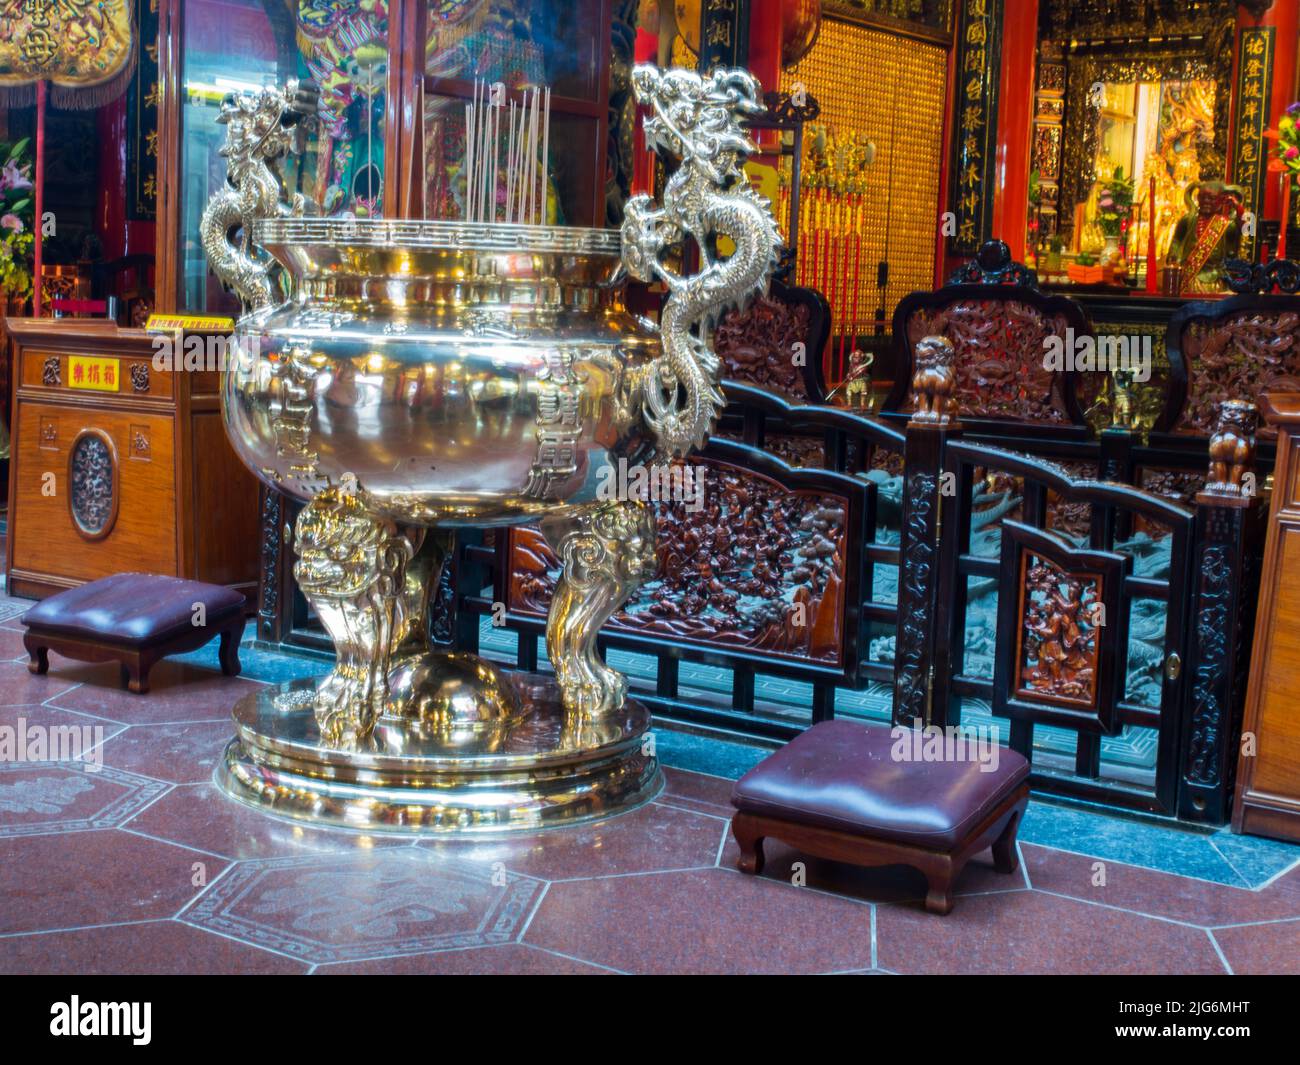 Taipei, Taiwan - October 2016: Golden censer and praying people in a temple in Taiwan. Asia Stock Photo